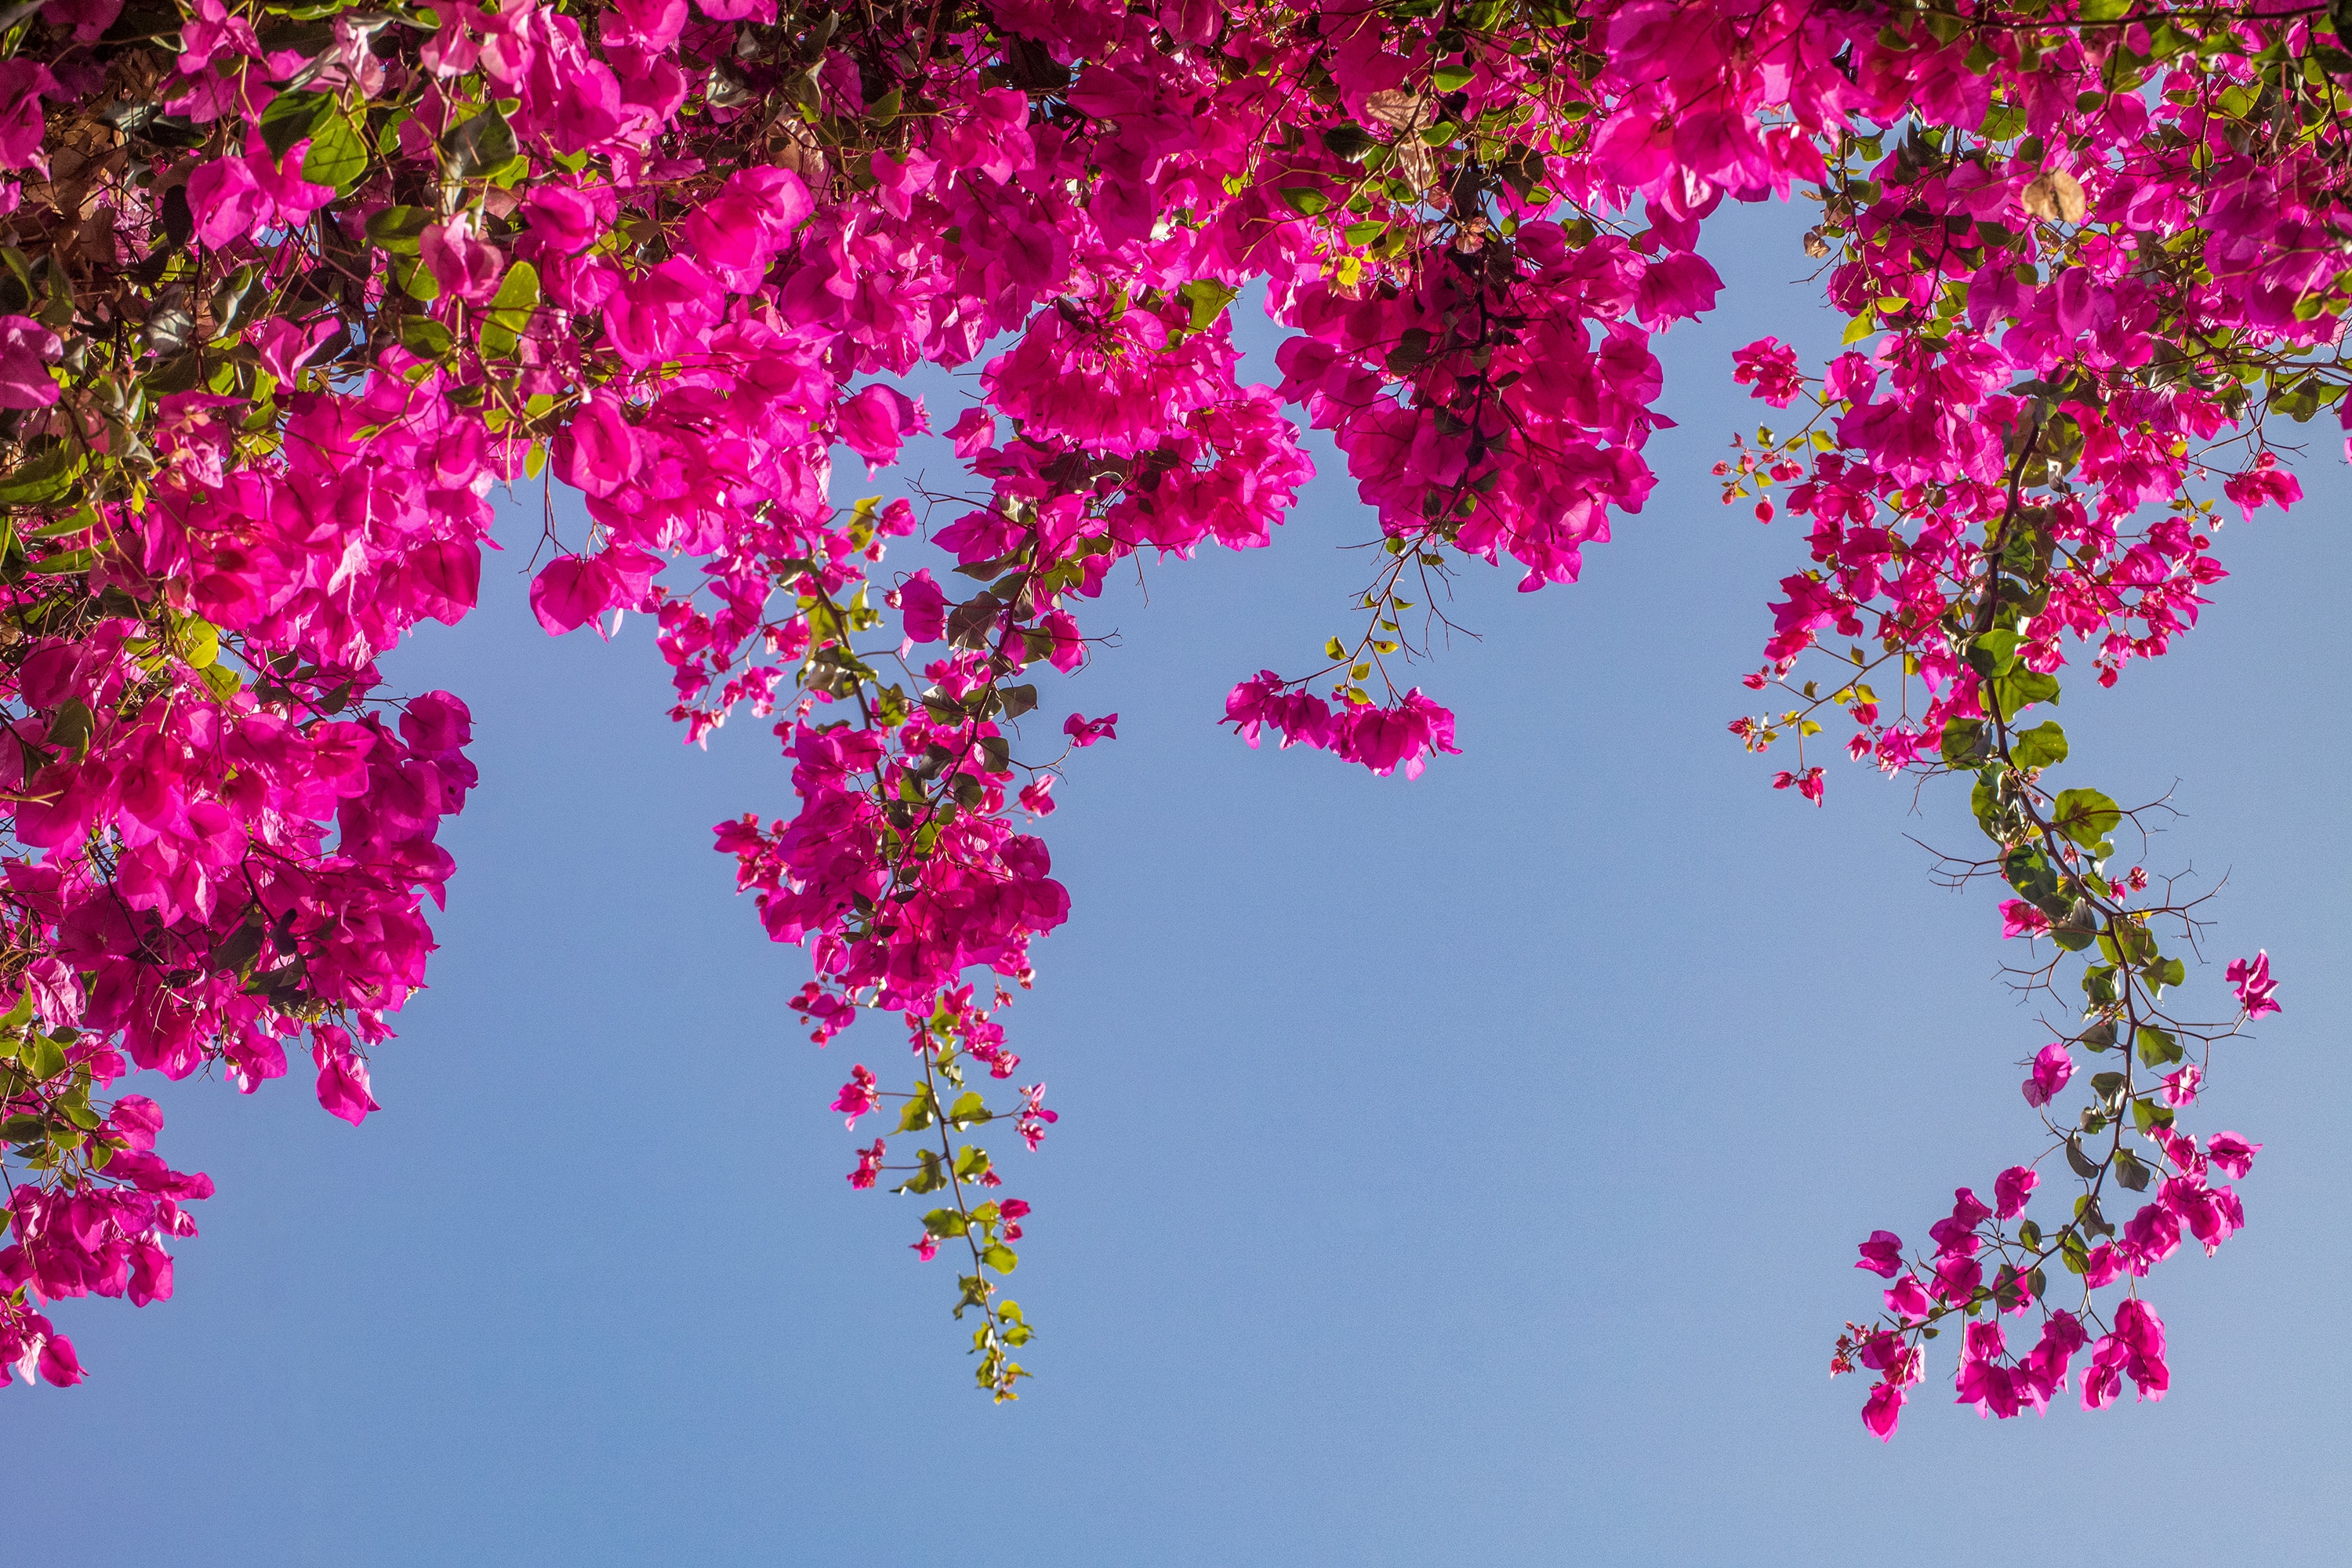 Pink bougainvillea flowers against the blue sky.